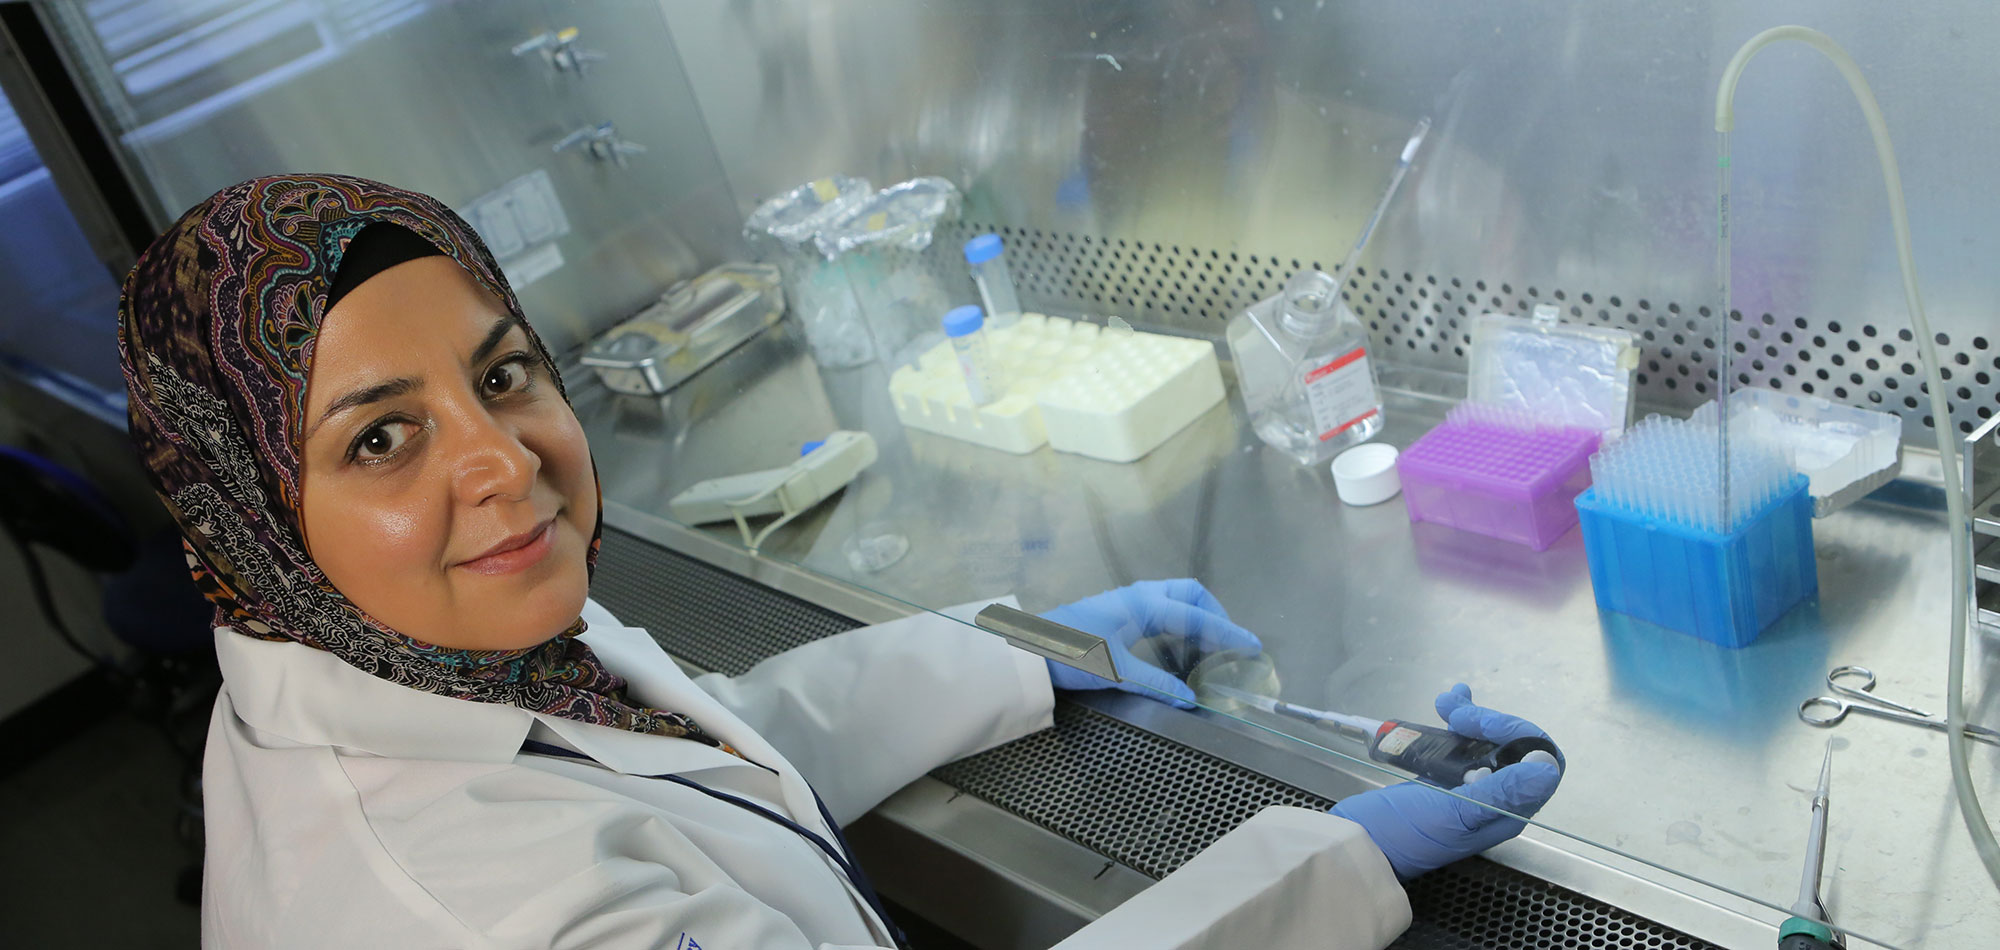 Dr. Fadia Kamal works in a lab in the Department of Orthopaedics and Rehabilitation at Penn State College of Medicine in August 2017. She is holding a pipette in one hand and a small dish in the other and looking toward the camera.